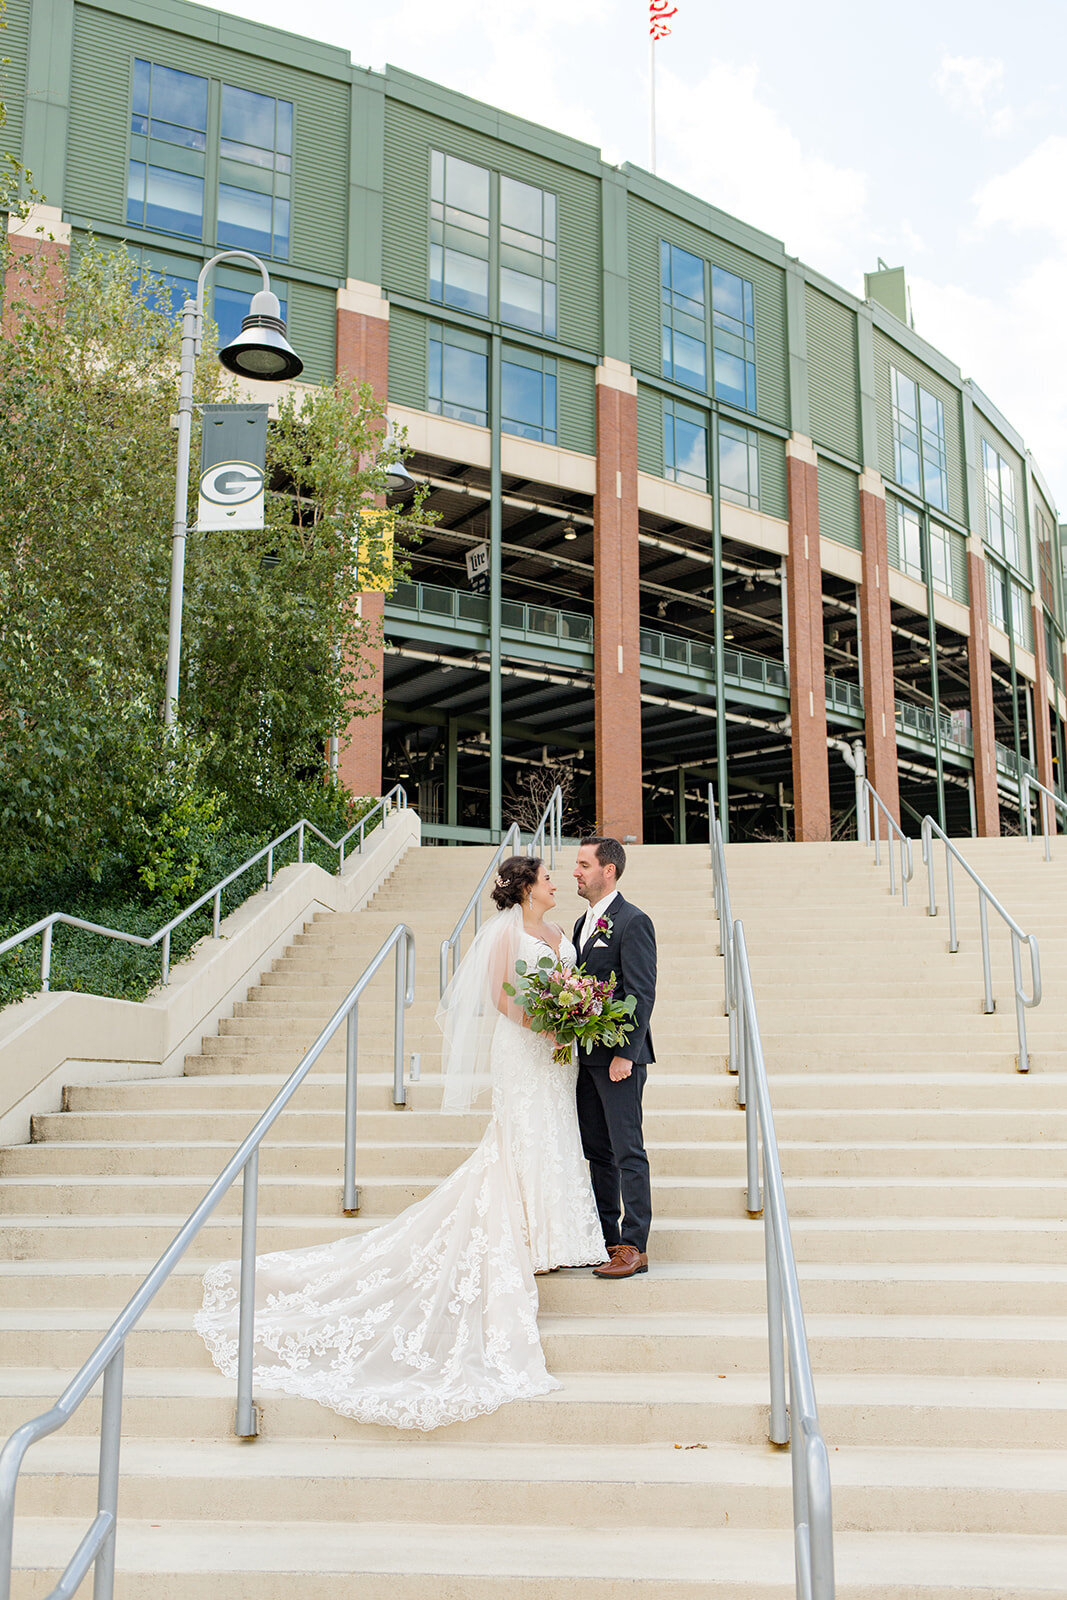 Wedding picture at lambeau field on the stairs